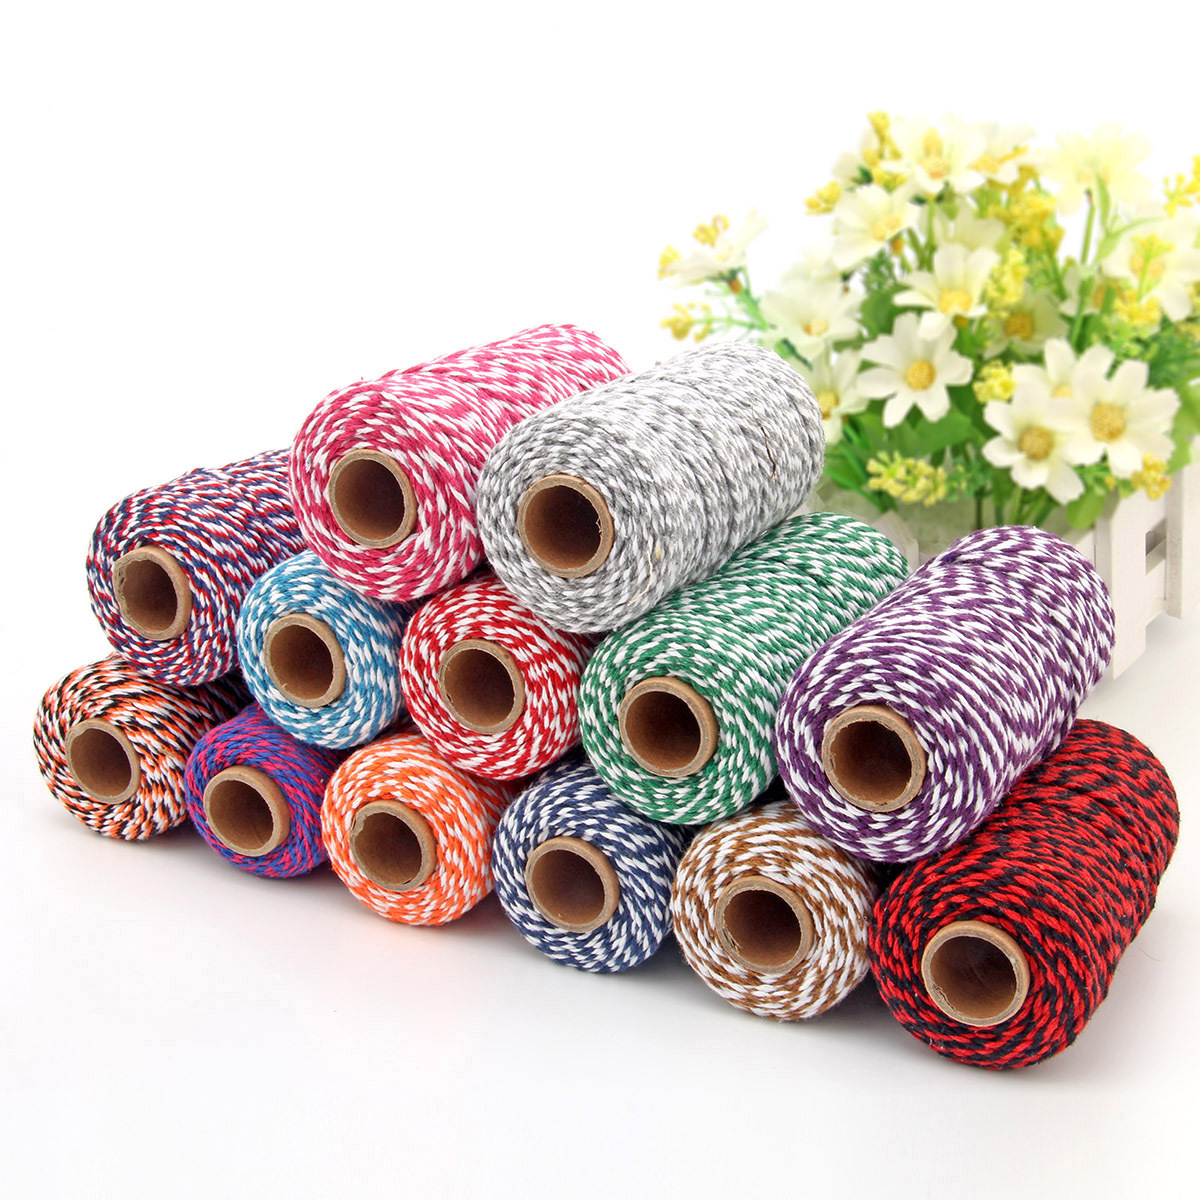 2mm-100m-Two-Tone-Cotton-Rope-DIY-Handcraft-Materials-Cotton-Twisted-Rope-Gift-Decor-Rope-Brush-1503610-2